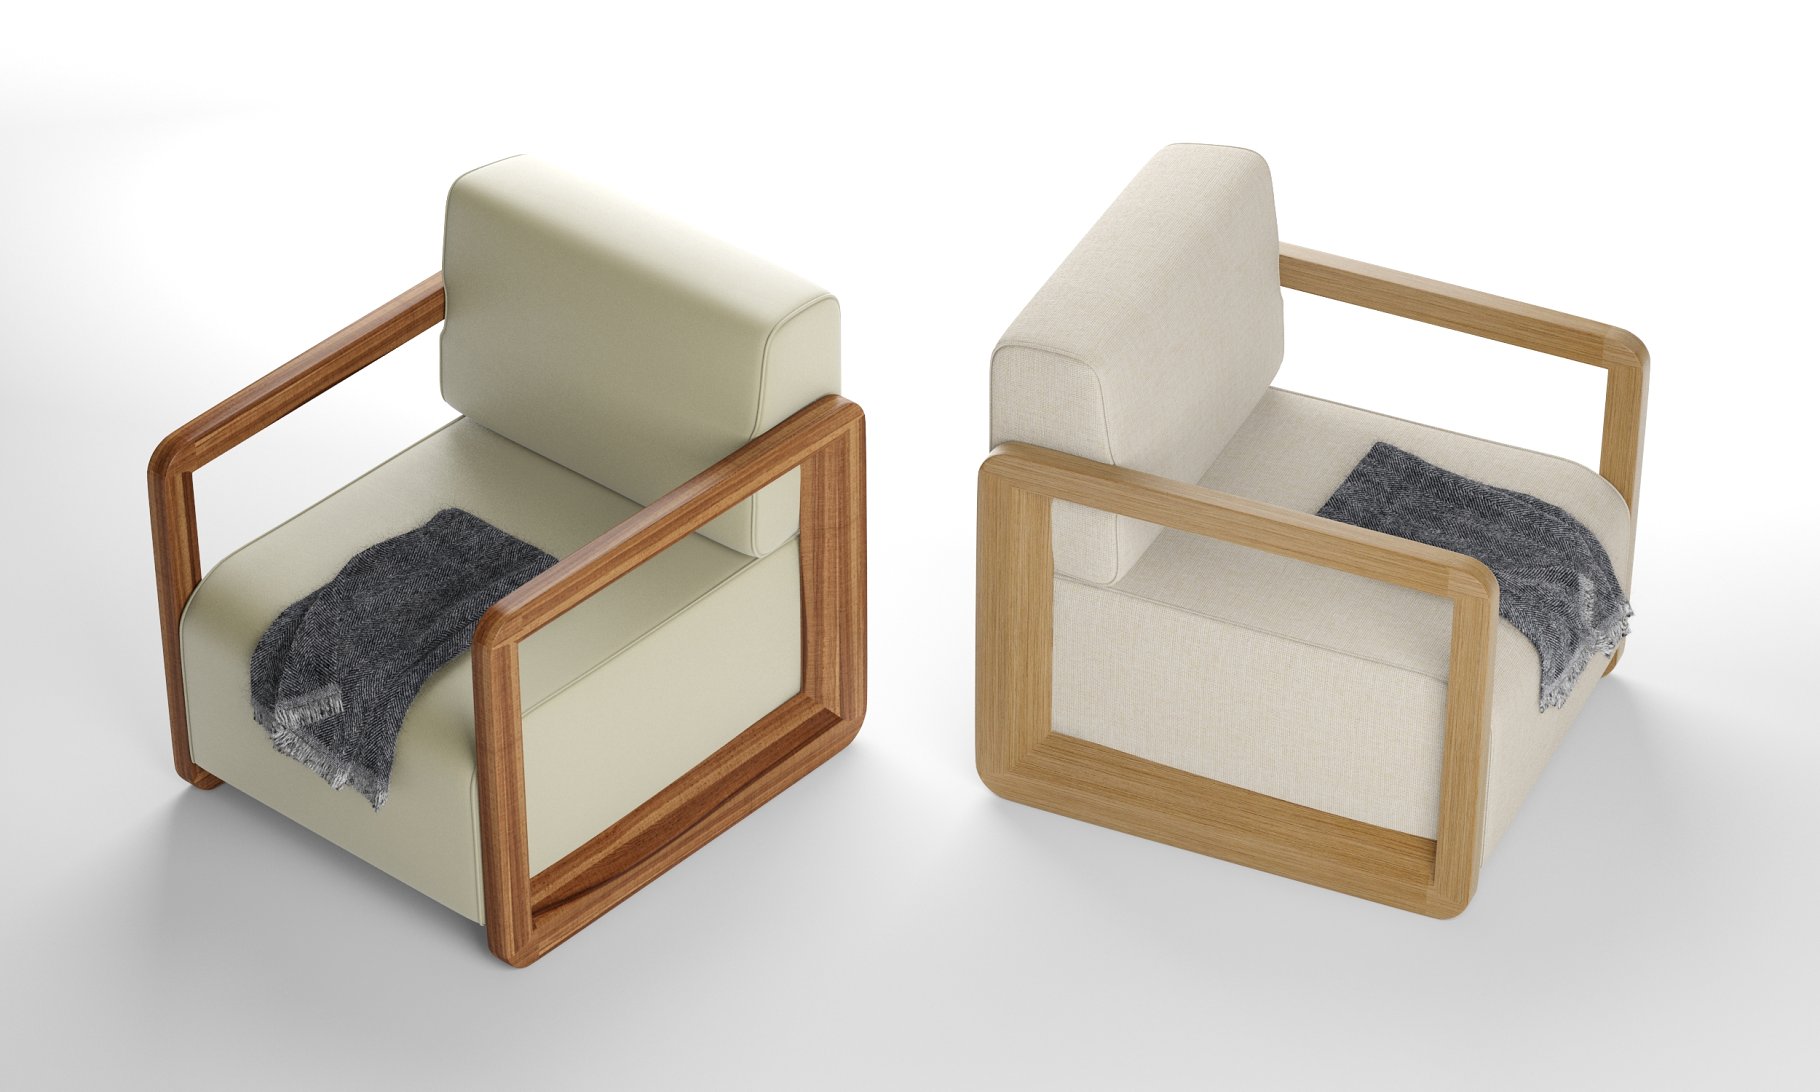 Rendering of an adorable 3d model of an upholstered armchair